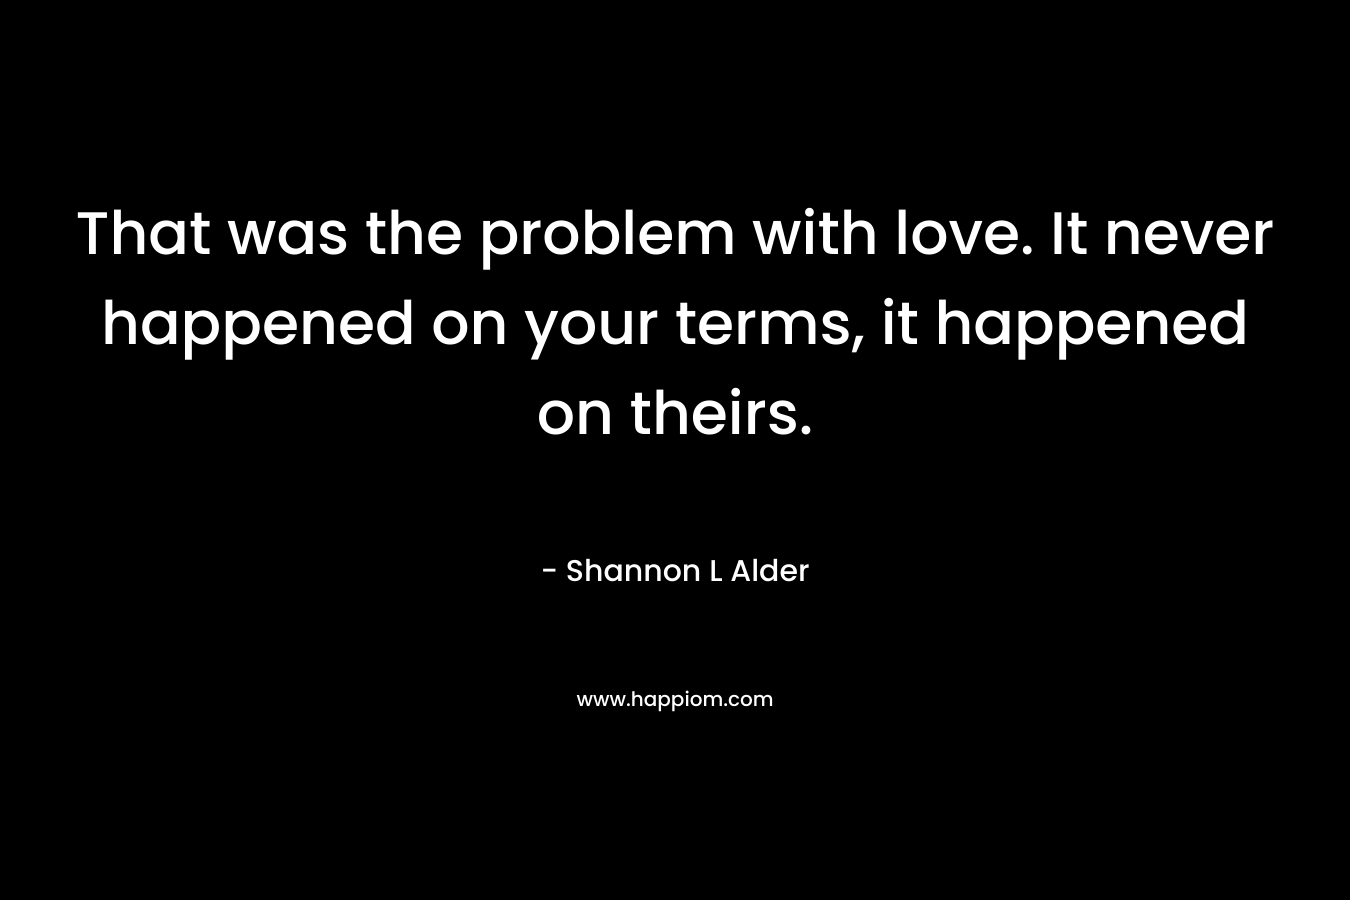 That was the problem with love. It never happened on your terms, it happened on theirs.